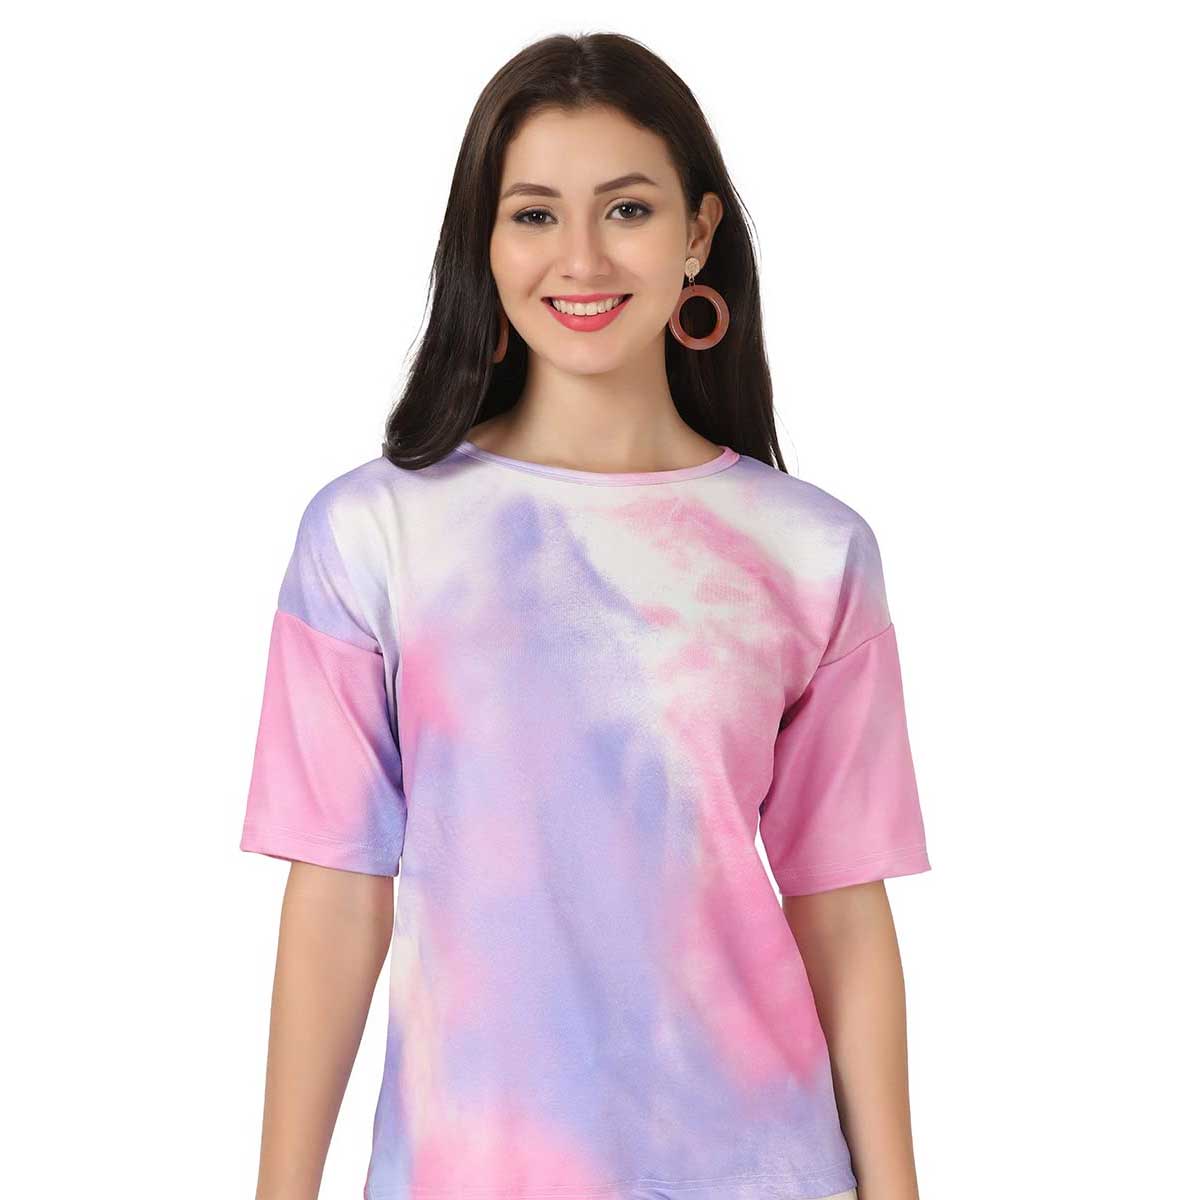 Tie Dye Tops Manufacturers in Poland